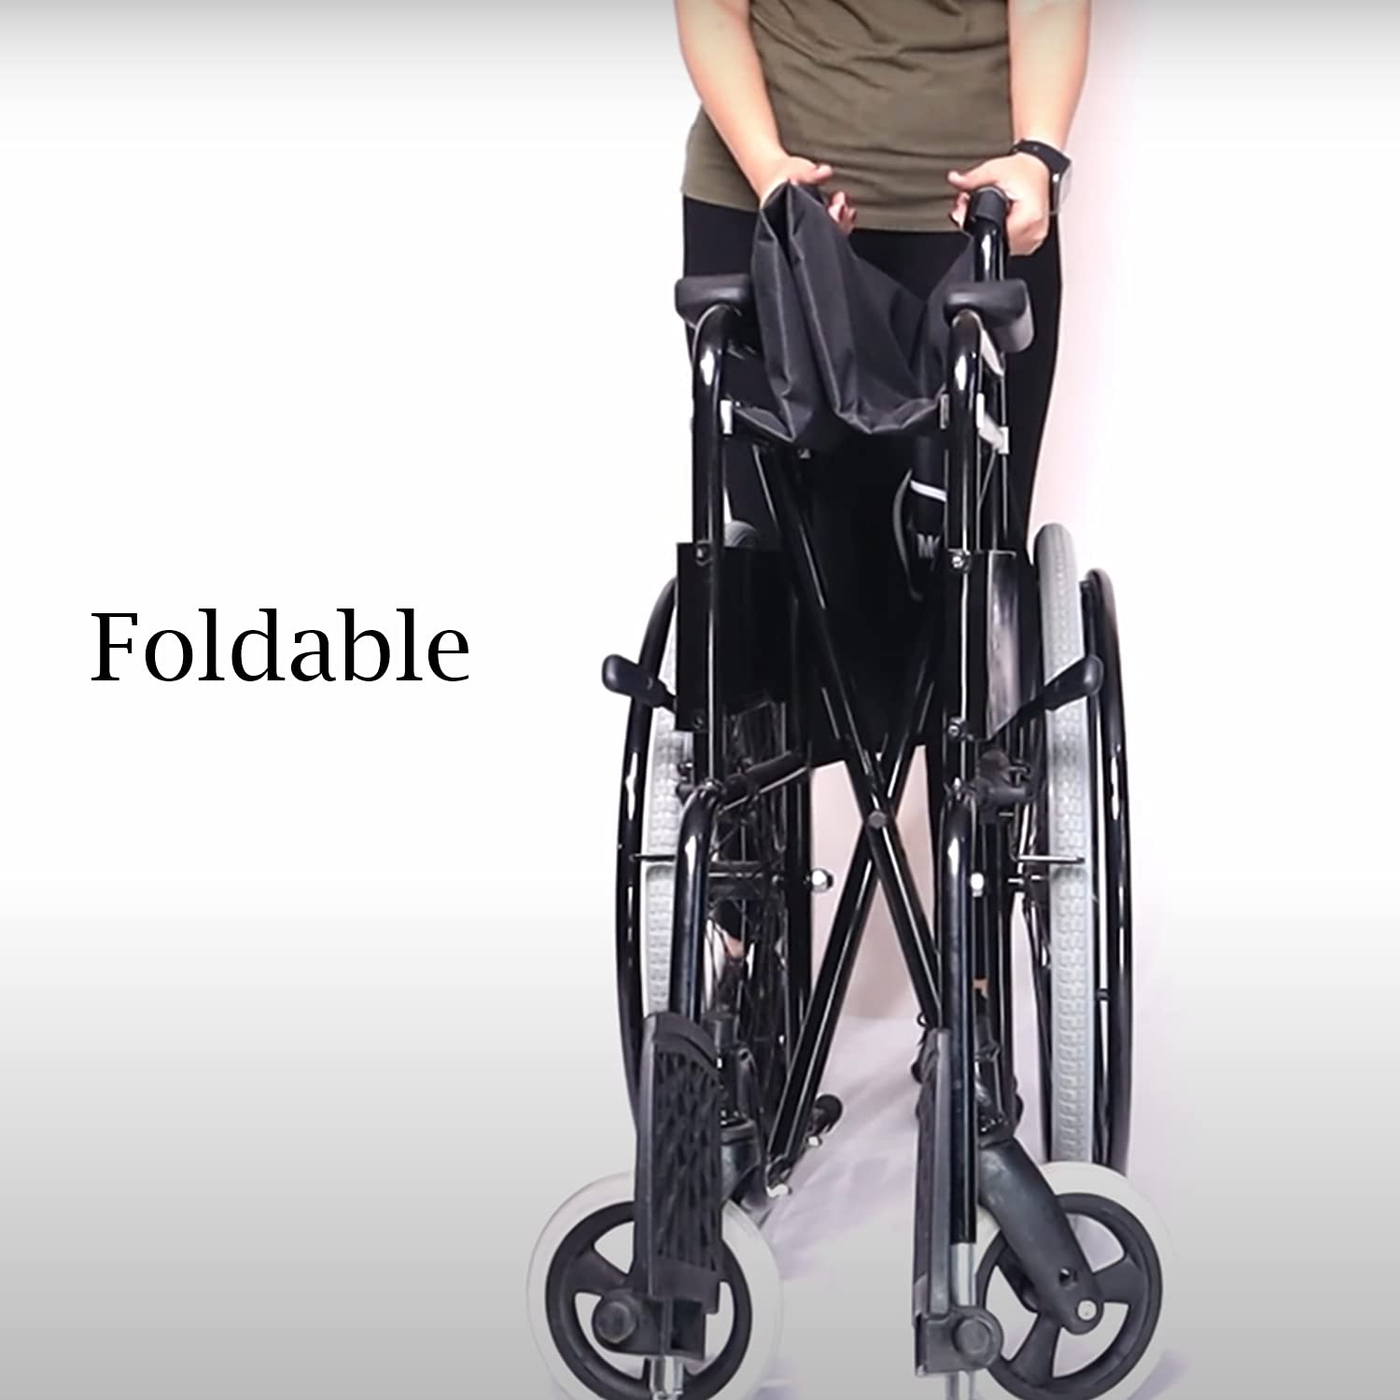 Medimove Ezee Lite Foldable Strong Built Up Quality Wheelchair